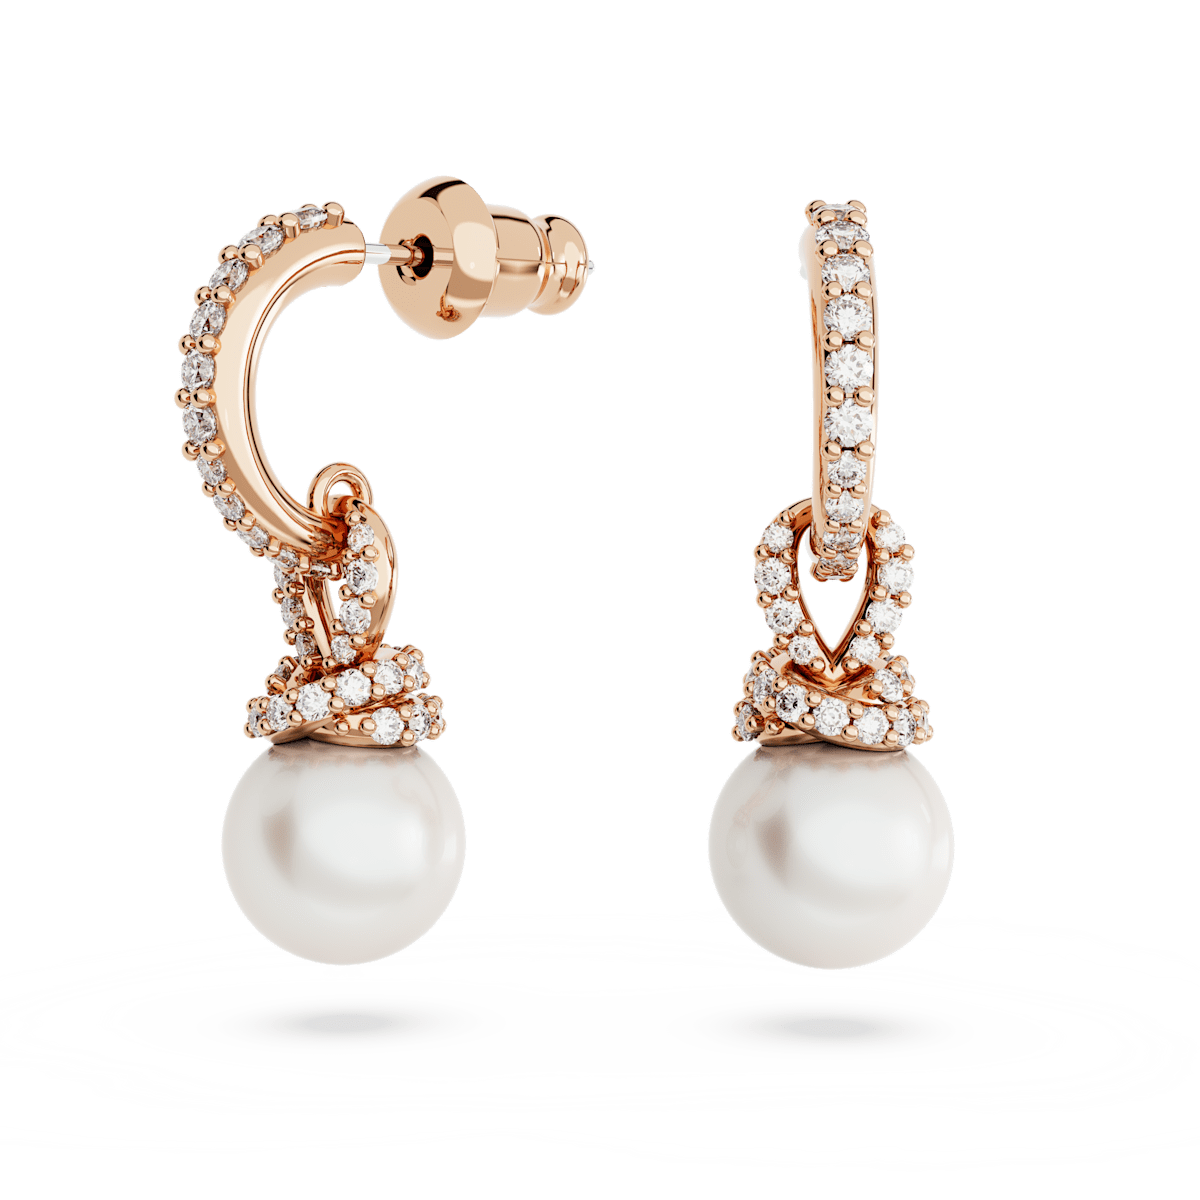 Originally drop earrings, White, Rose gold-tone plated